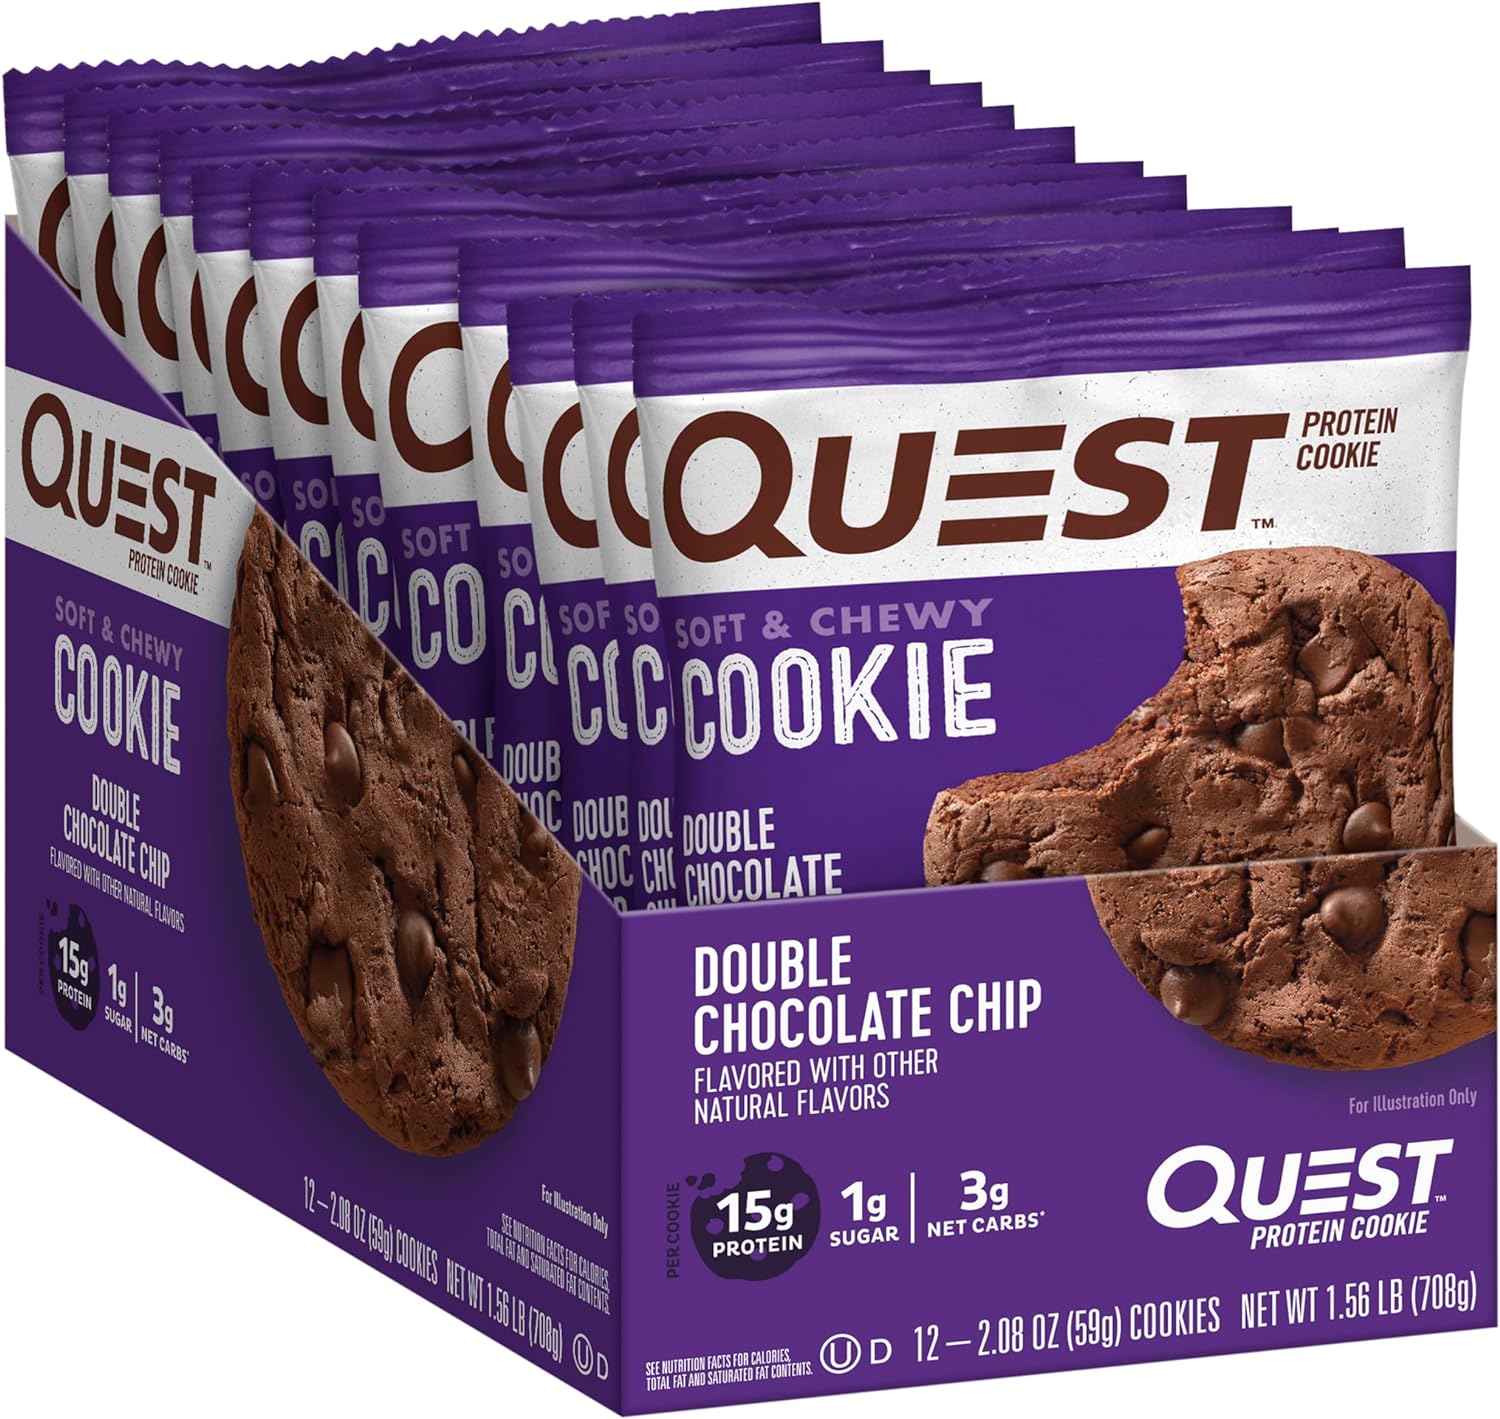 Quest Nutrition, Protein Cookie, Chocolate Chip, 12 Pack, 2.08 oz (59 g) Each